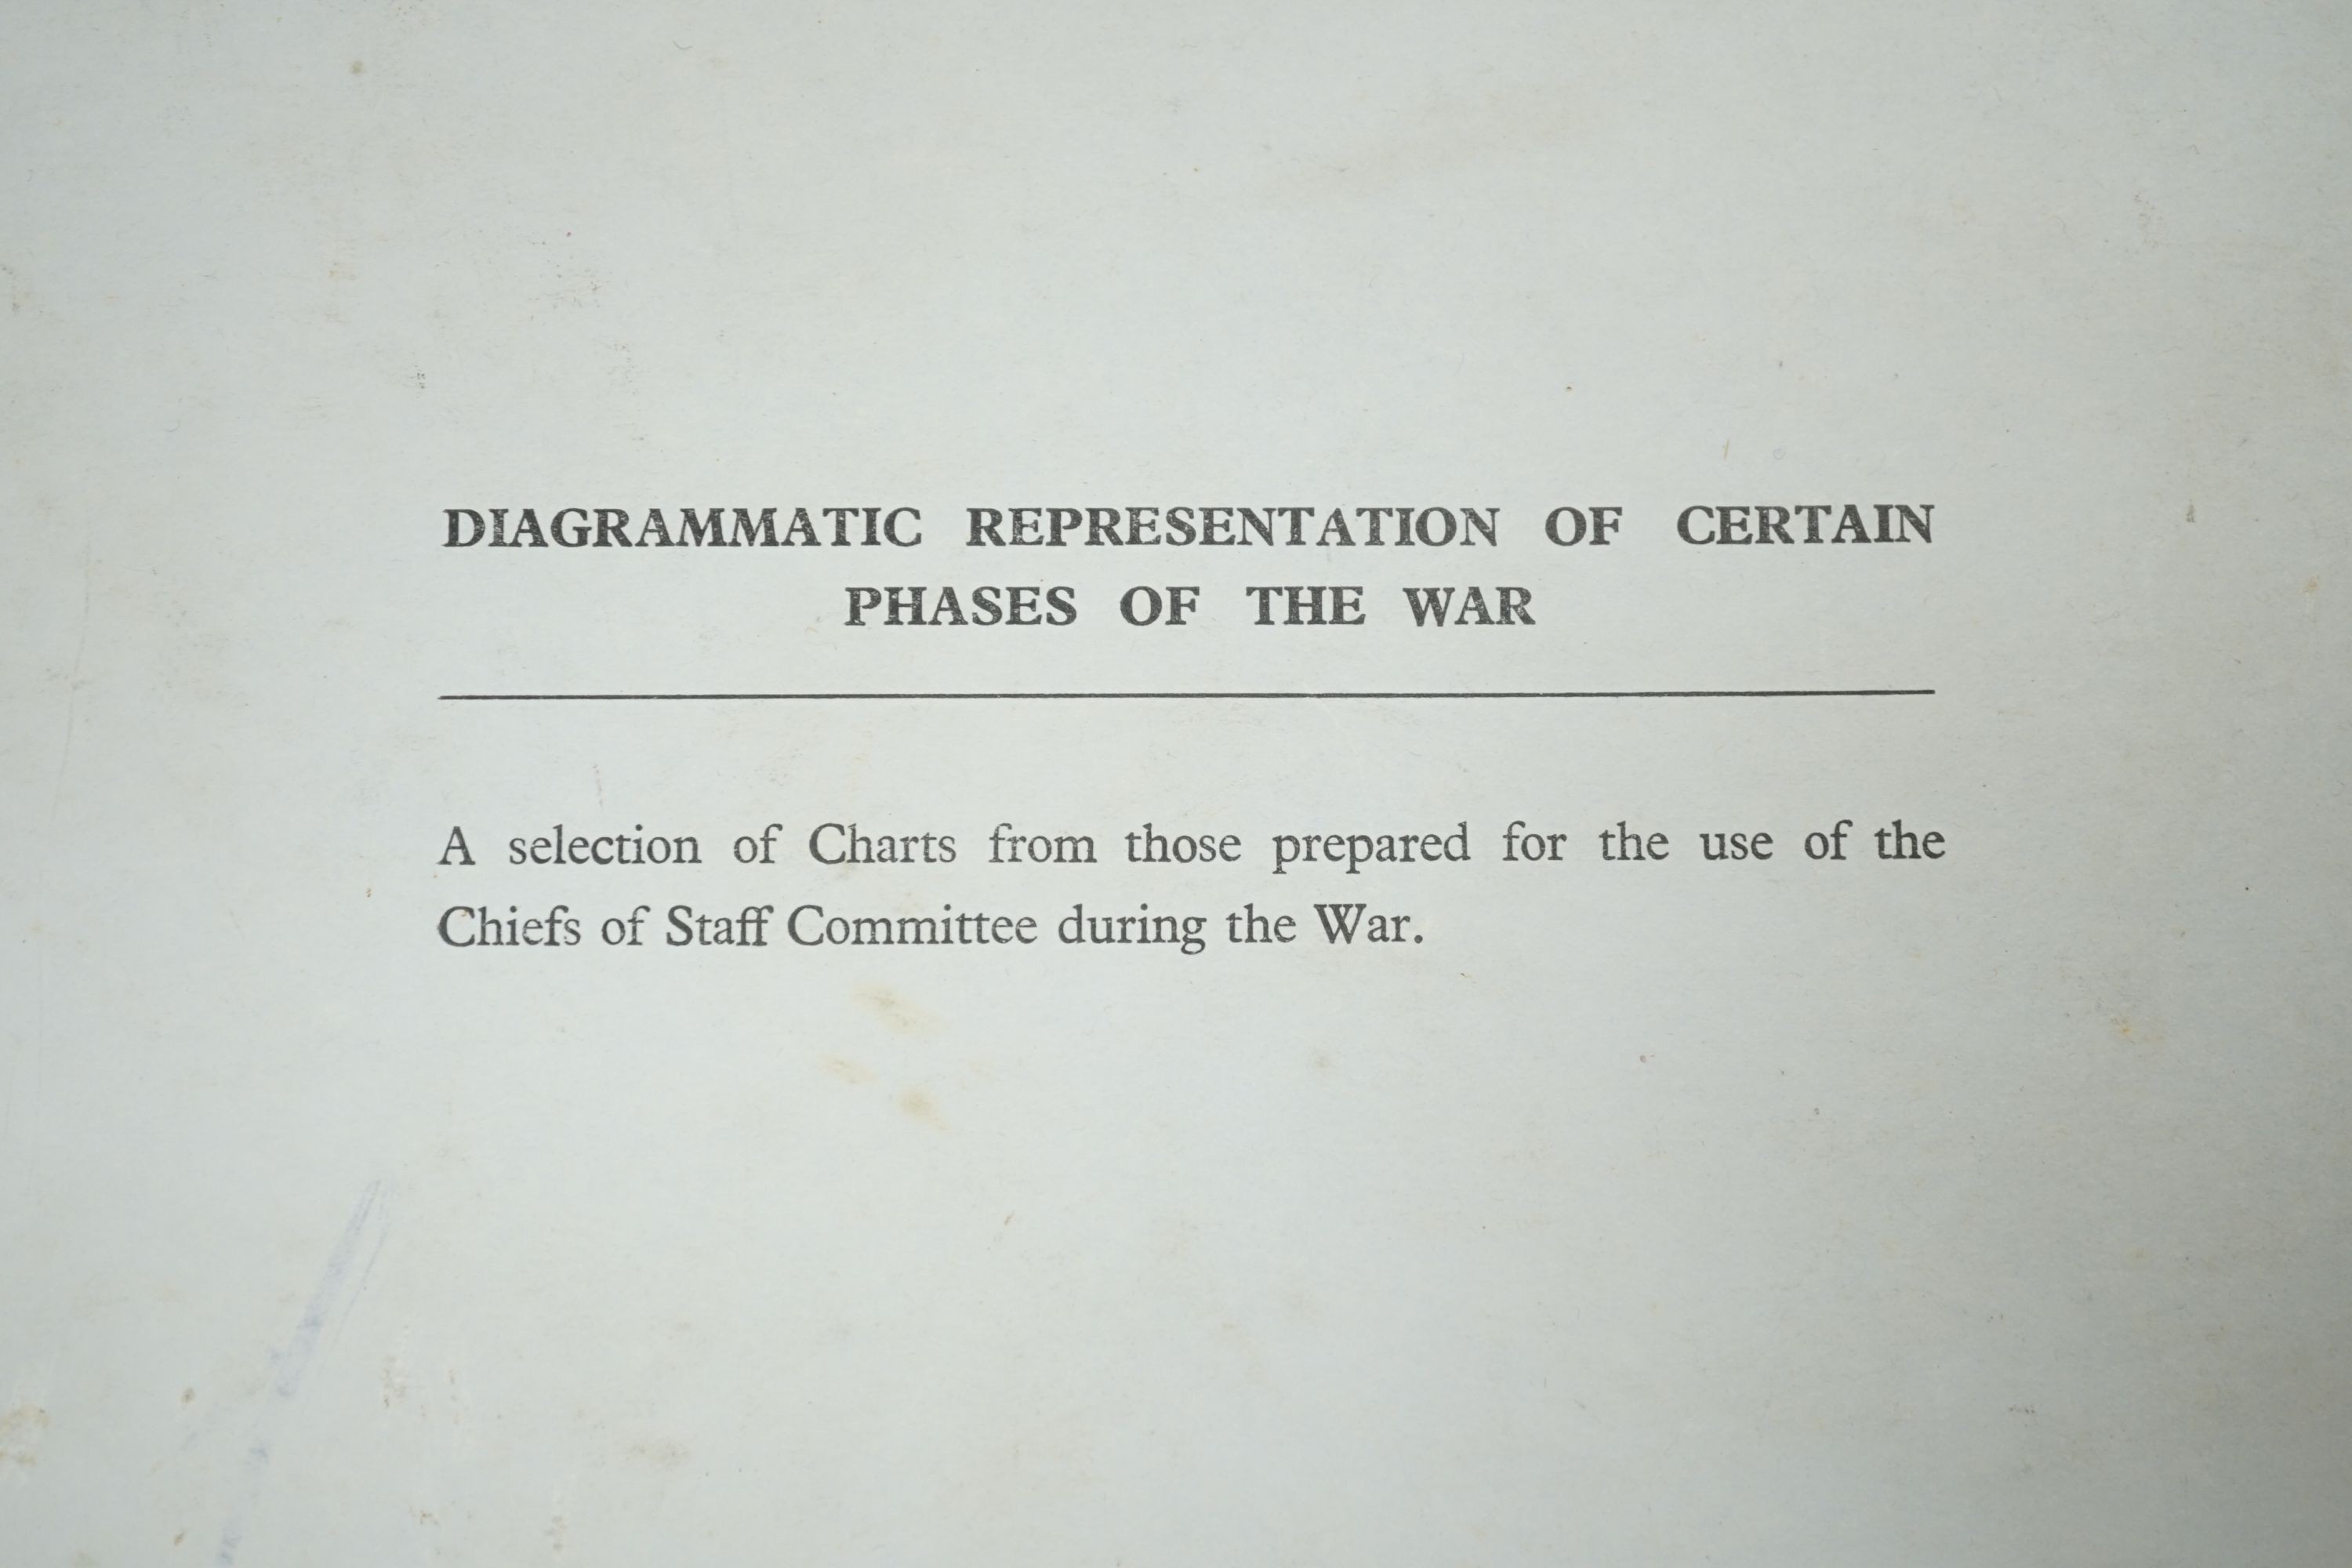 Diagrammatic Representation of Certain Phases of the War - A selection of Charts from those prepared for the use of the Chiefs of Staff Committee during the War.